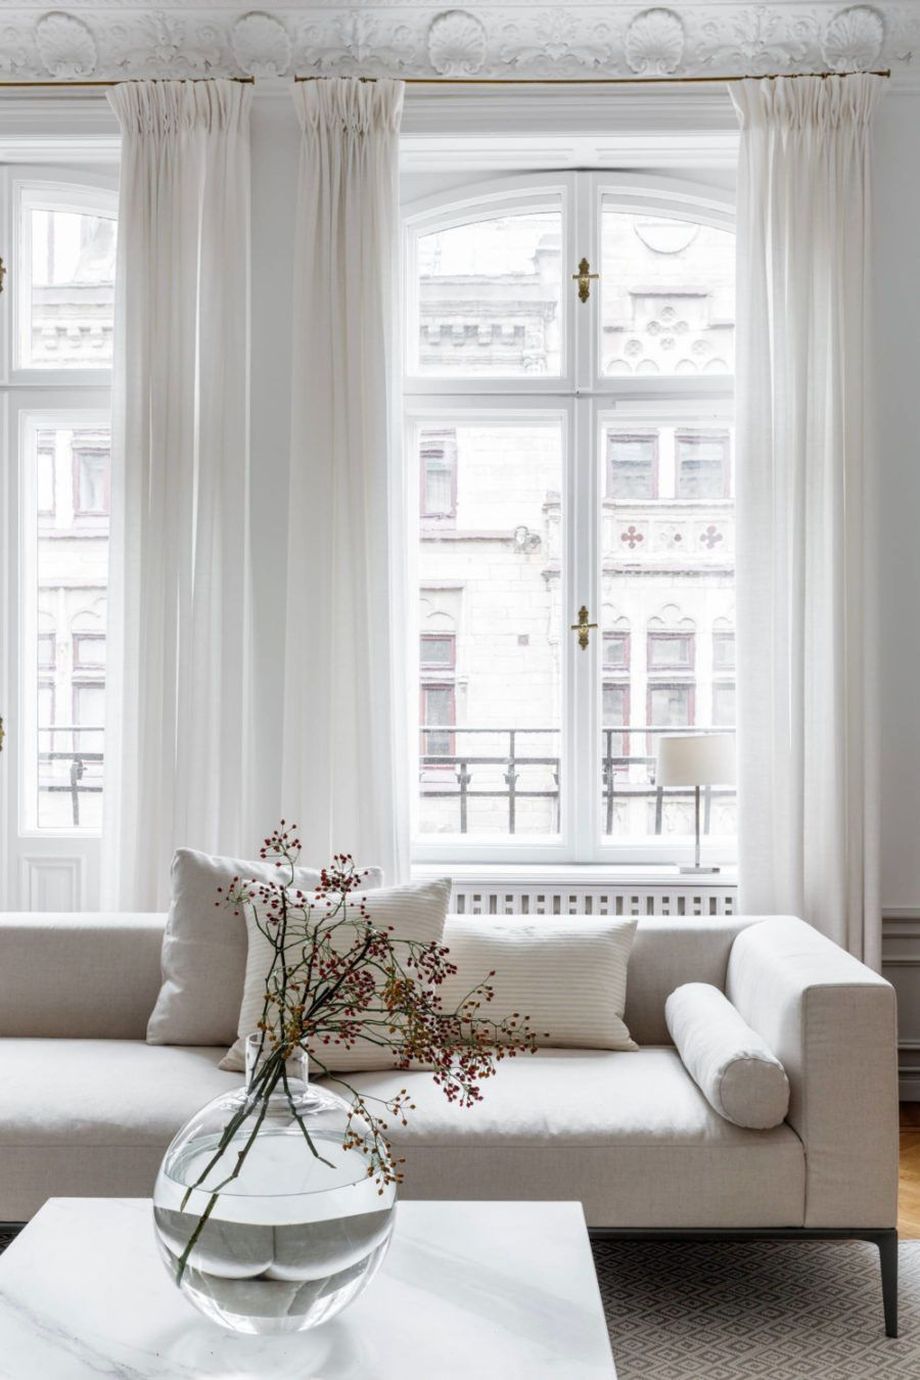 Living Room with White Curtains